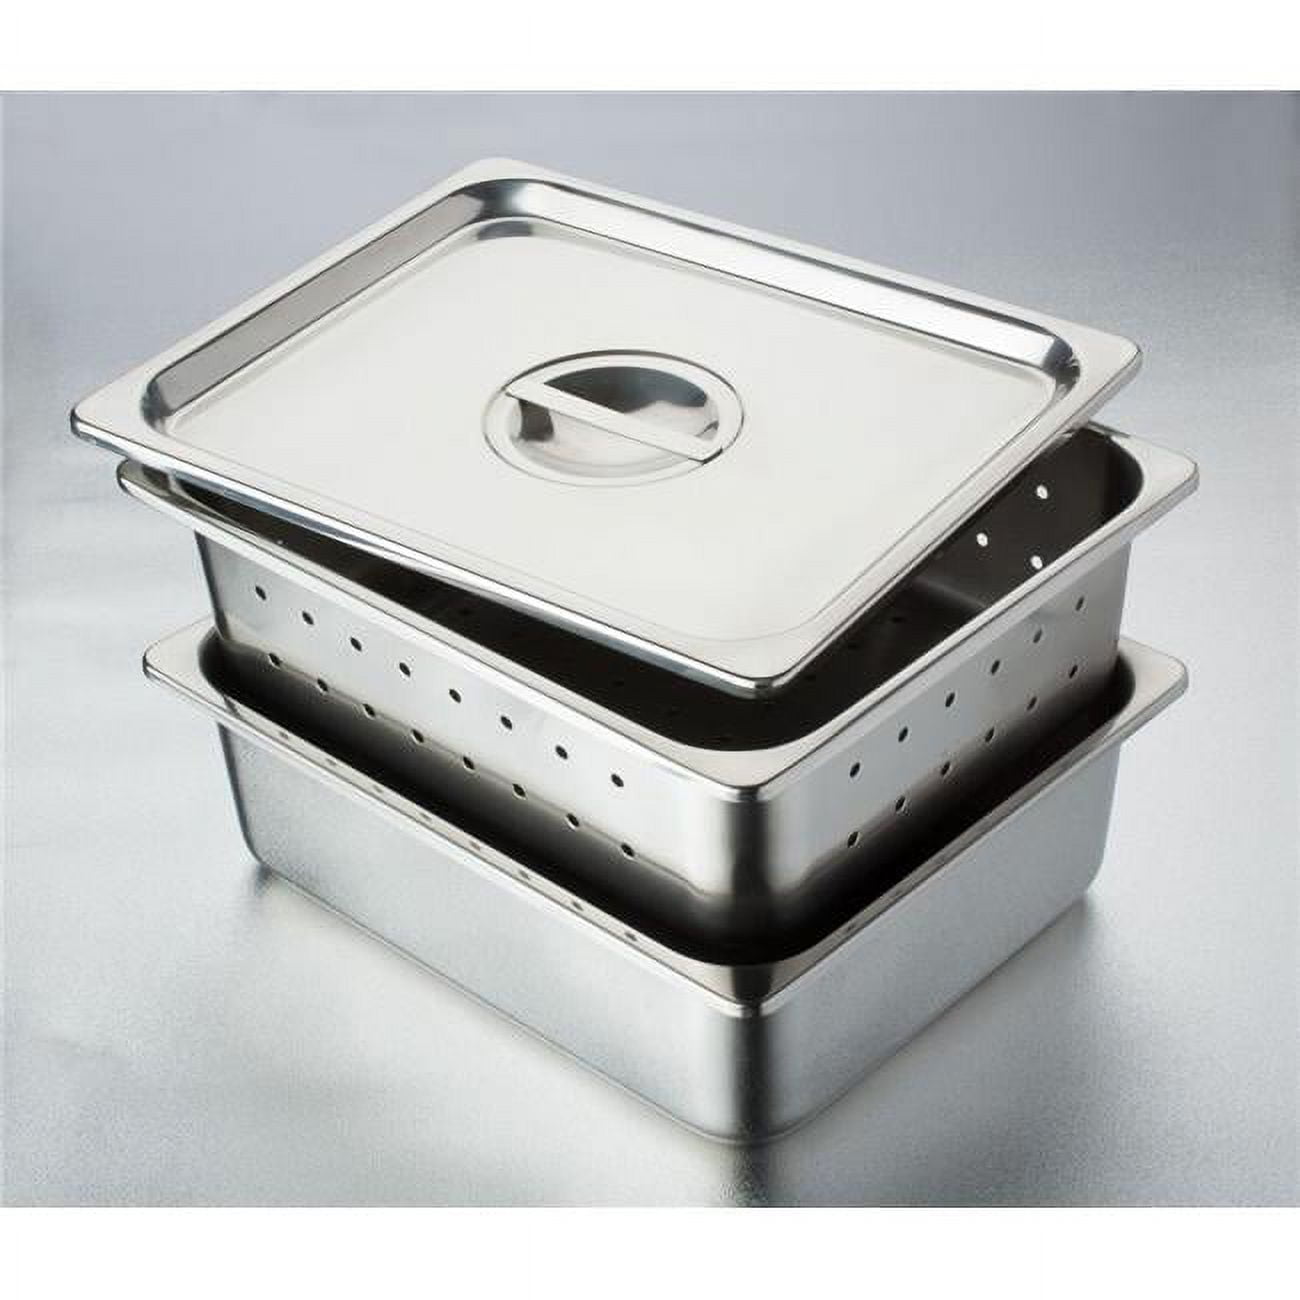 Picture of Tech Med 4273 12.5 x 7 x 4 in. Stainless Steel Instrument Tray with No Cover